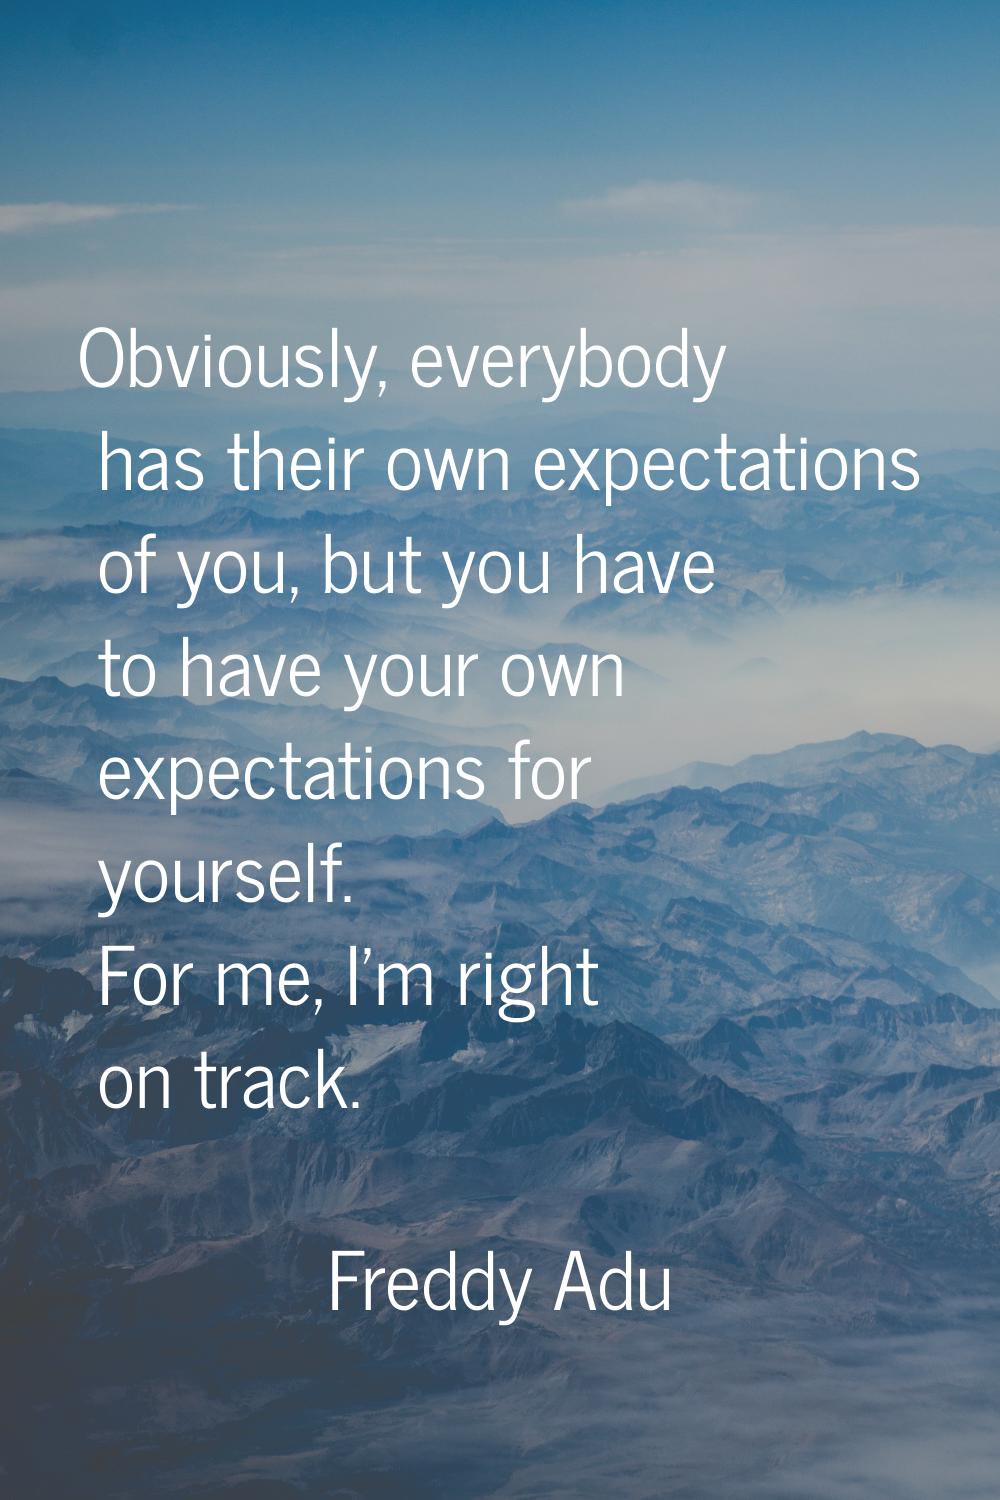 Obviously, everybody has their own expectations of you, but you have to have your own expectations 